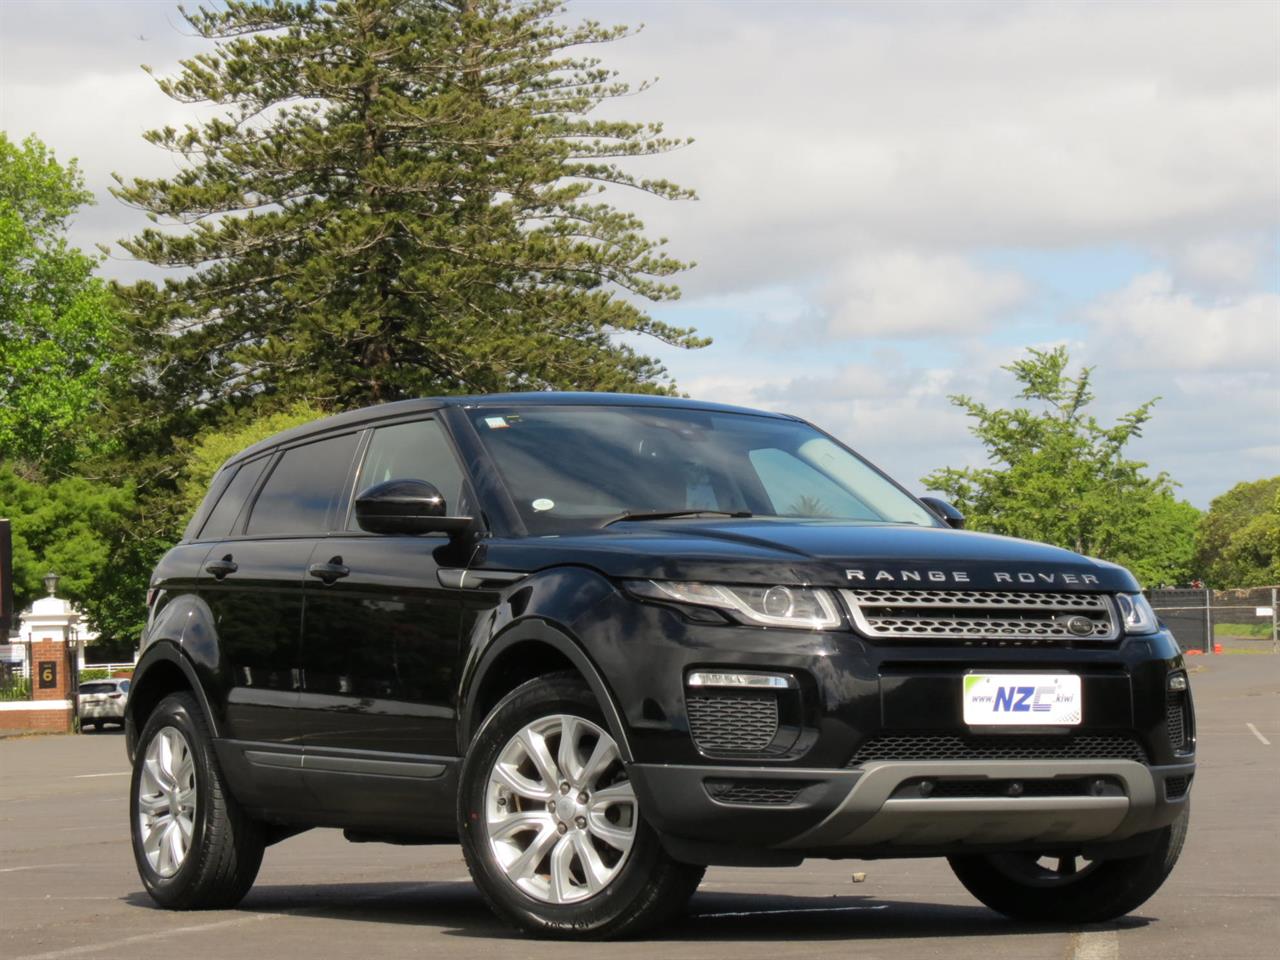 NZC 2018 Land Rover Range Rover Evoque just arrived to Auckland